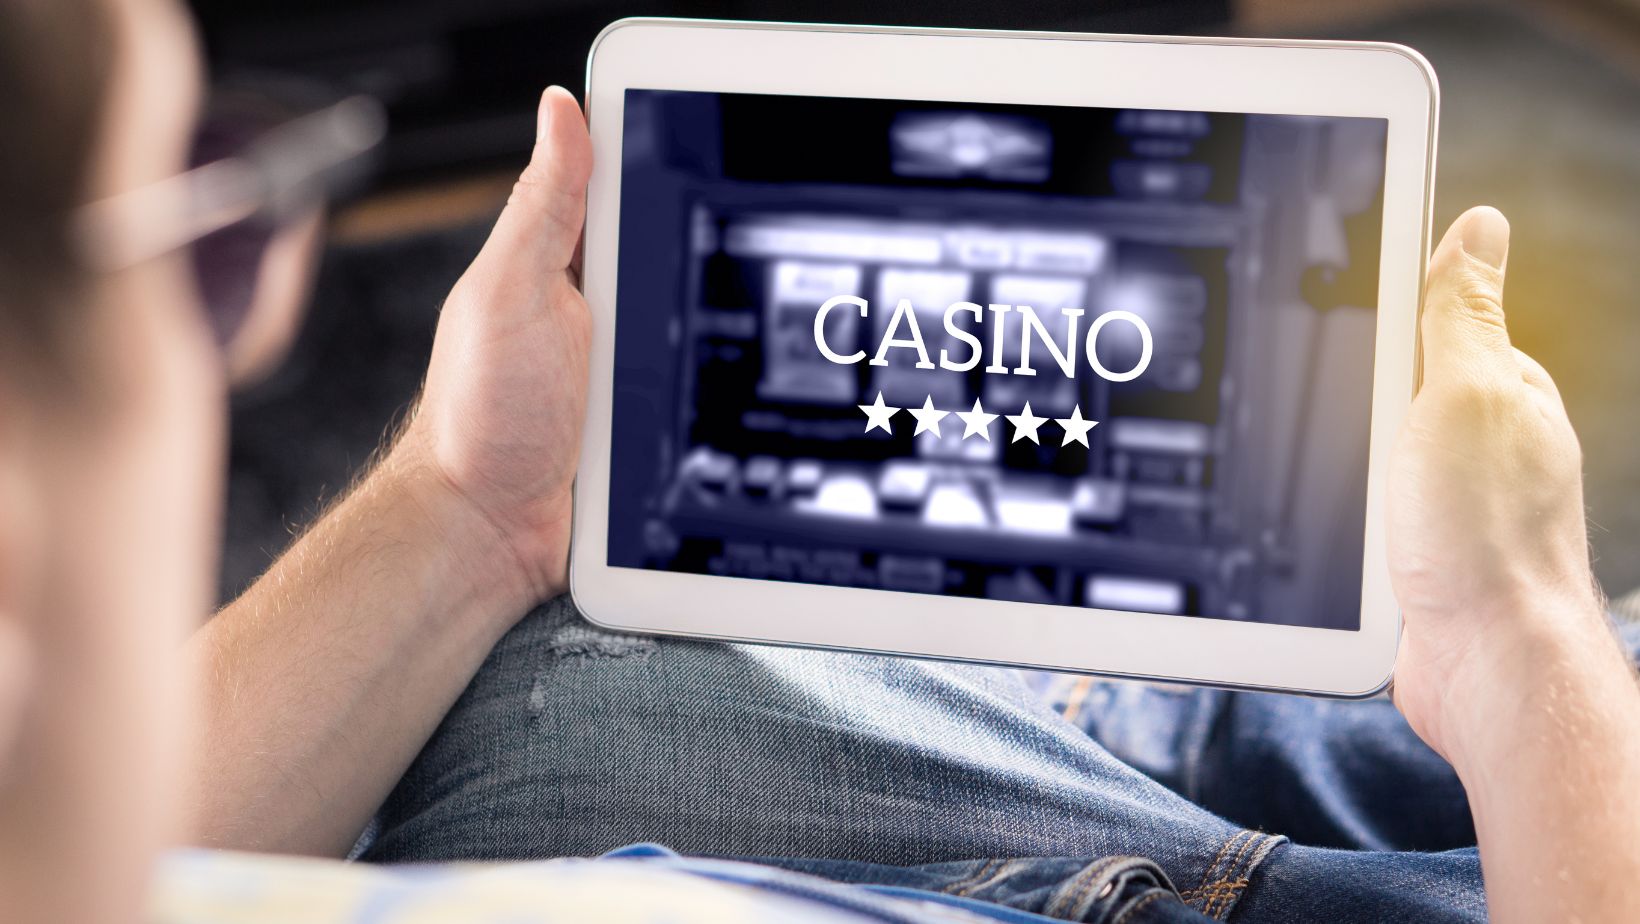  How to Find the Ultimate Online Casinos in Thailand